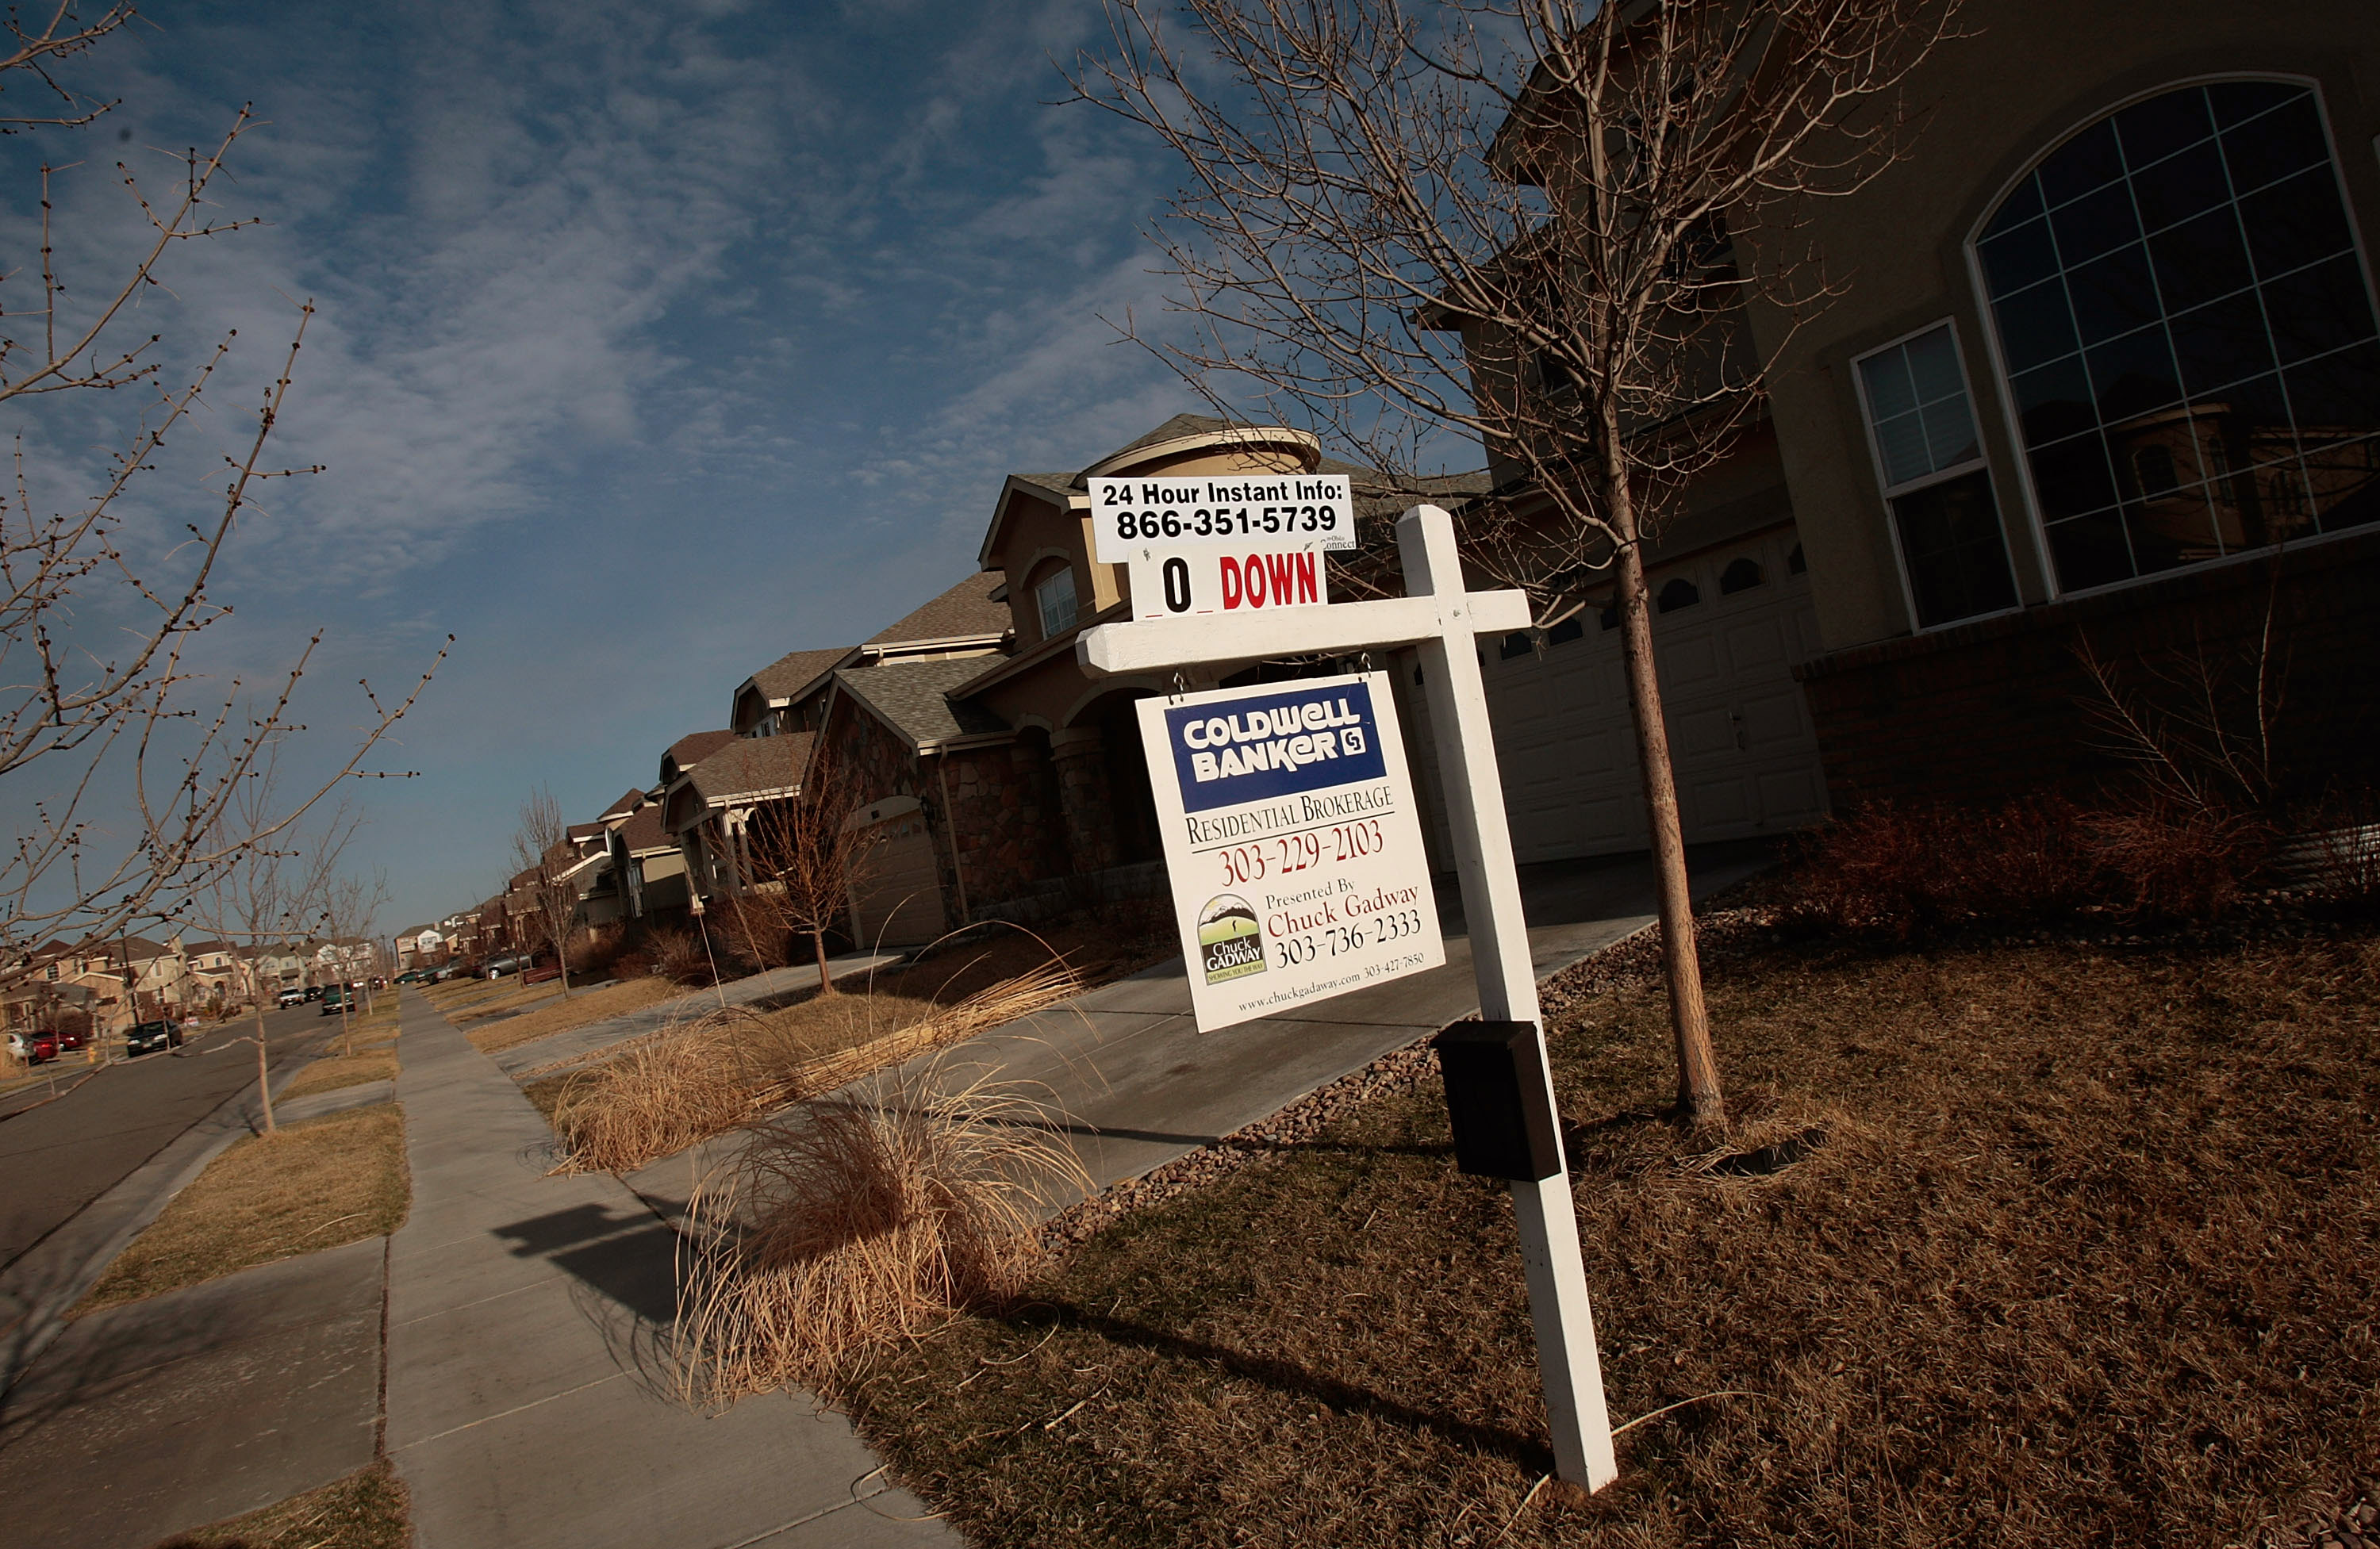 Colorado may avoid a housing market disaster amid fears of collapse